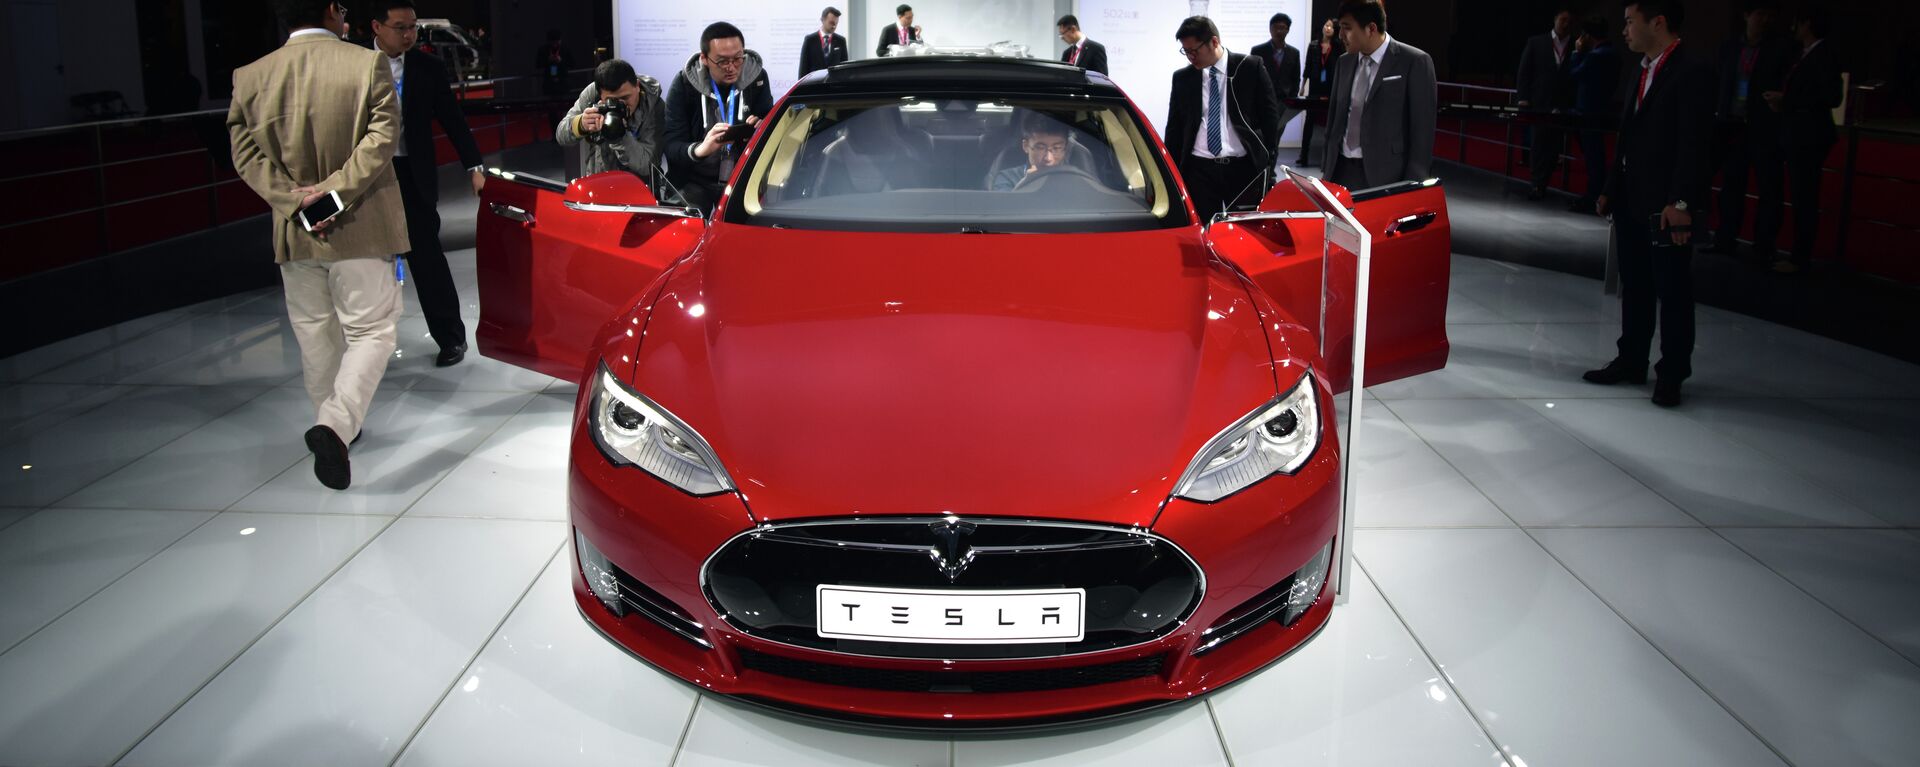 A Tesla Model S P85d car is displayed at the 16th Shanghai International Automobile Industry Exhibition in Shanghai on April 20, 2015 - Sputnik International, 1920, 19.04.2021